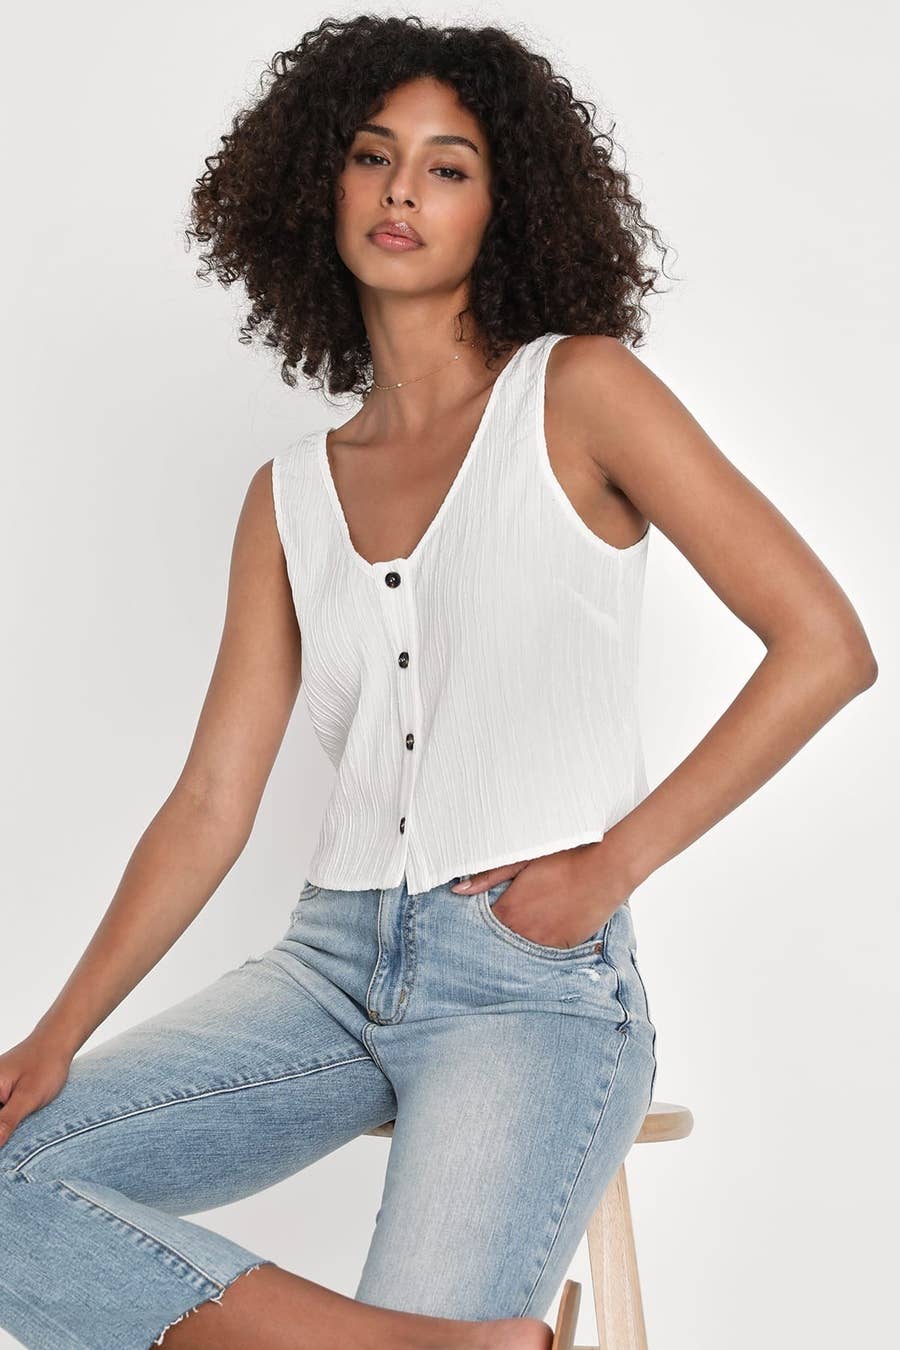 9 spring tops from Lulus you'll want to wear everywhere